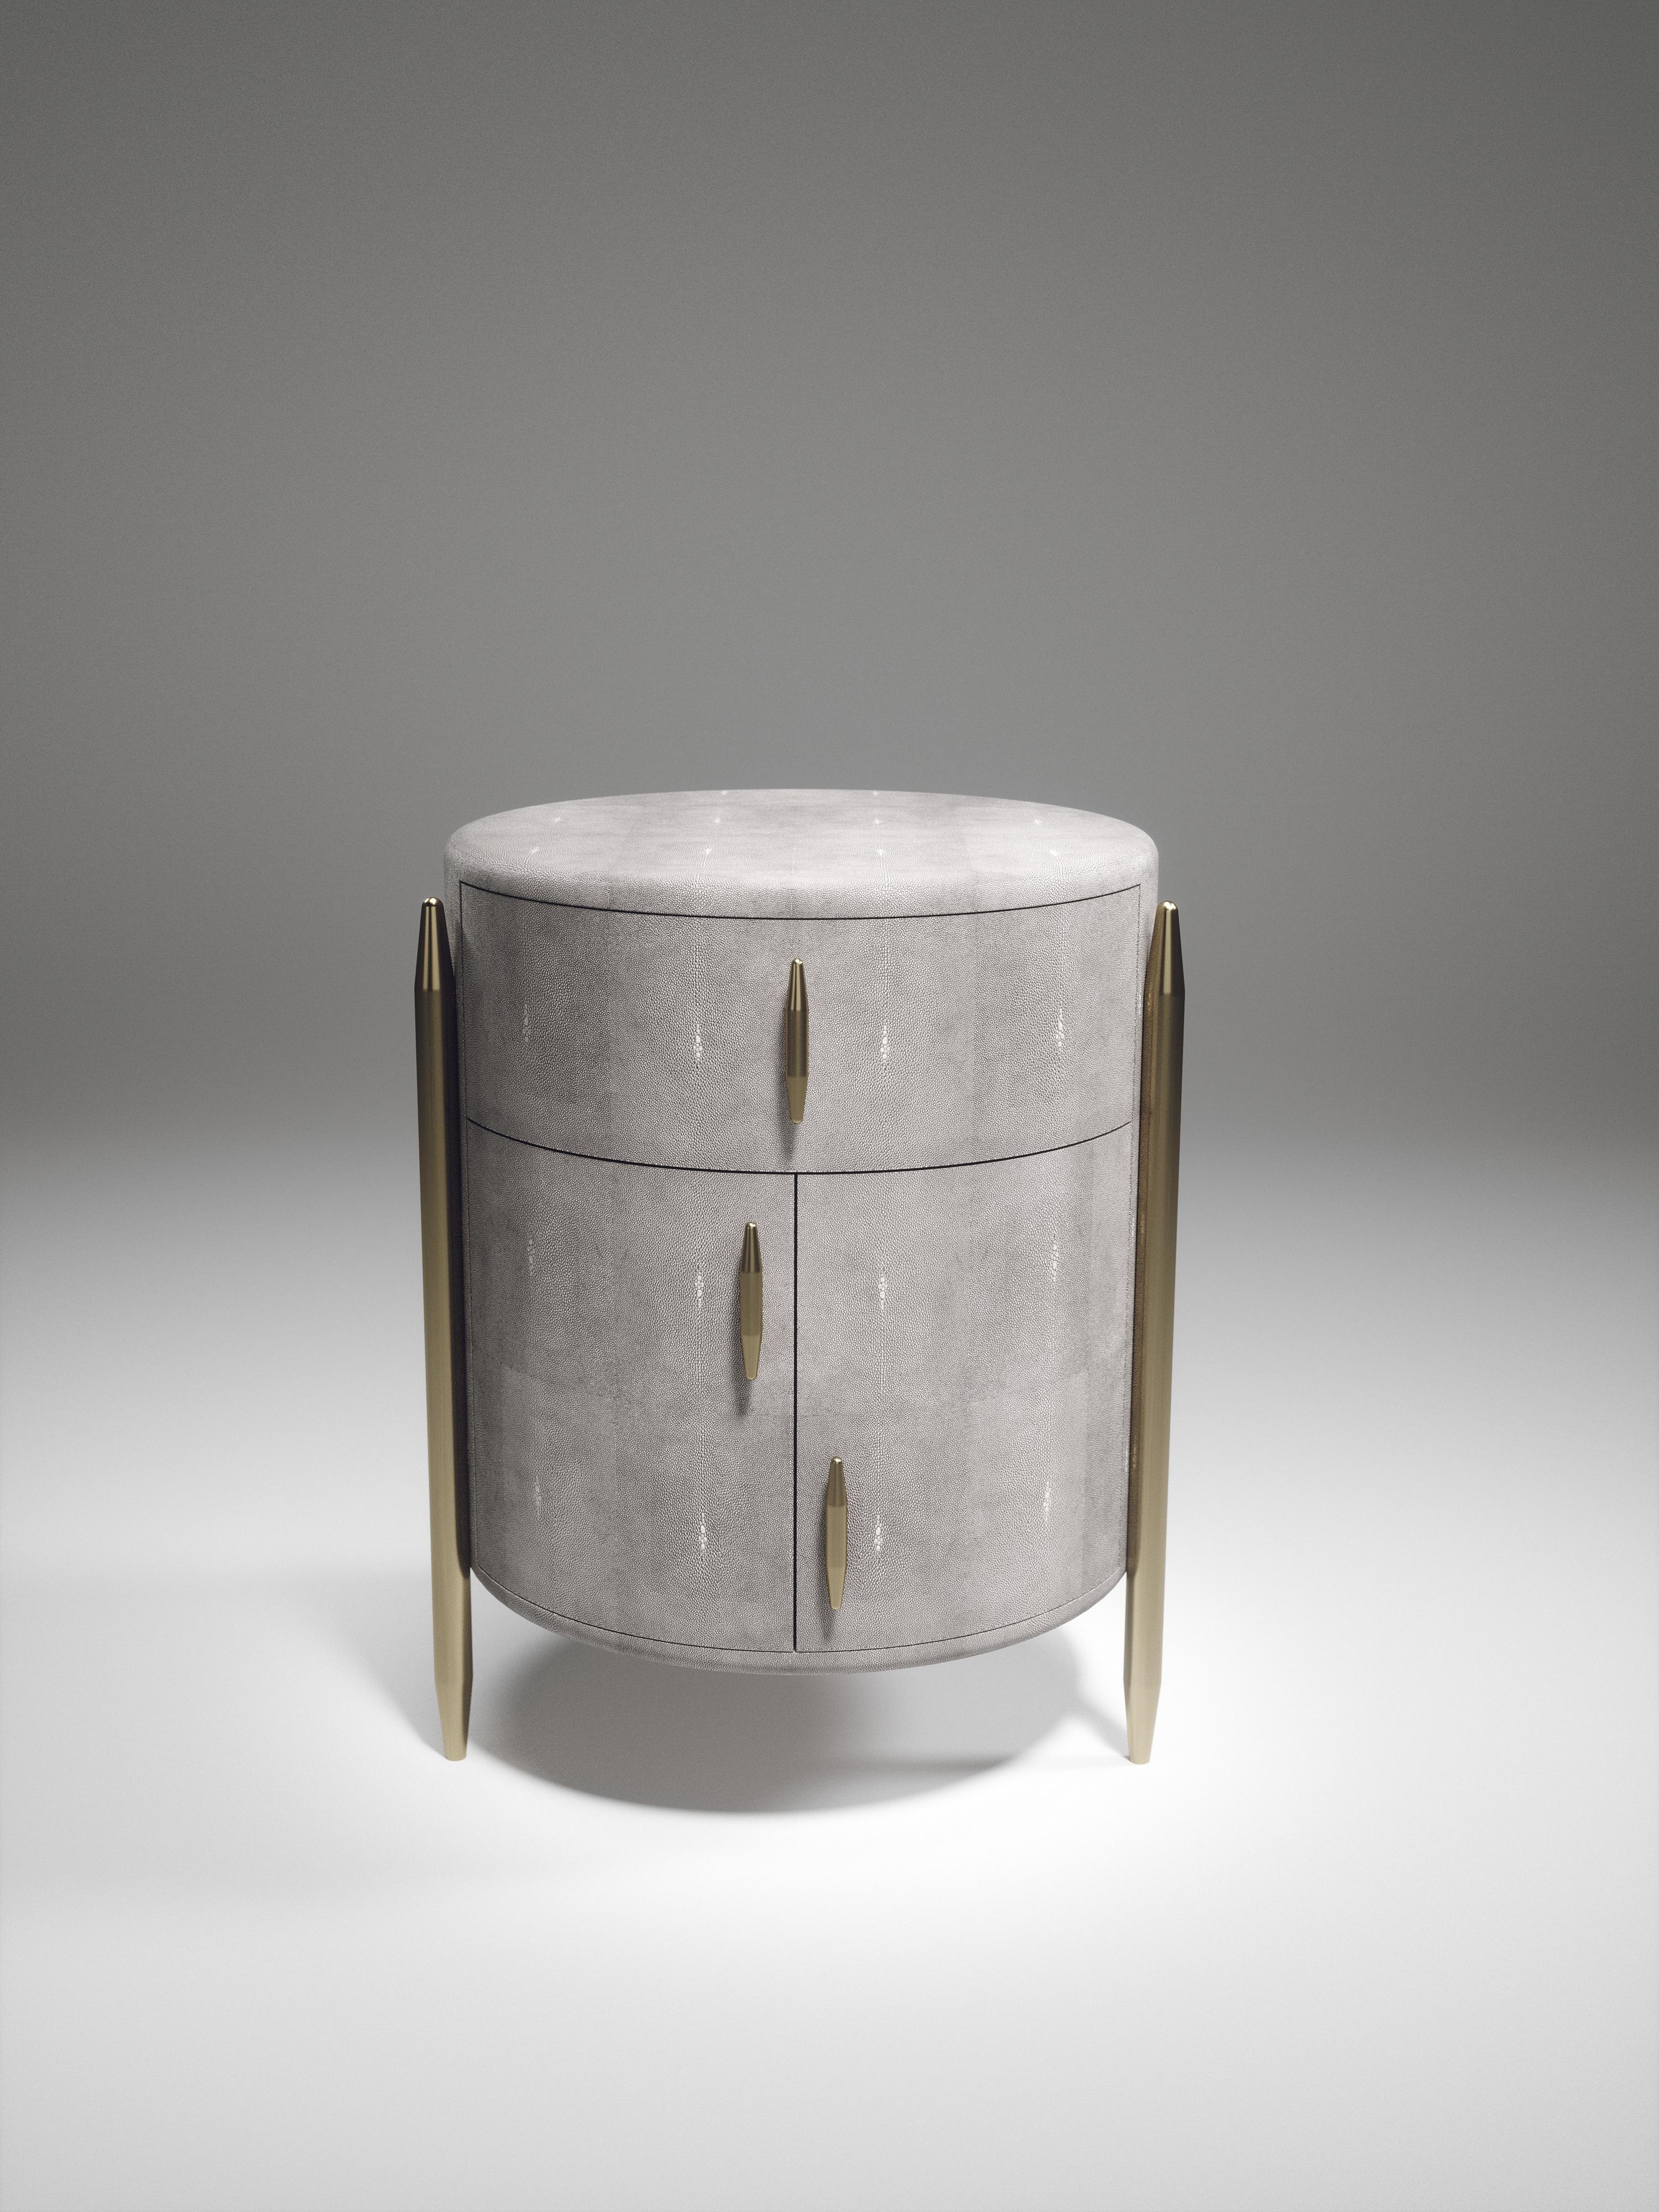 Contemporary Shagreen Night Stand with Polished Stainless Steel Accents by Kifu Paris For Sale